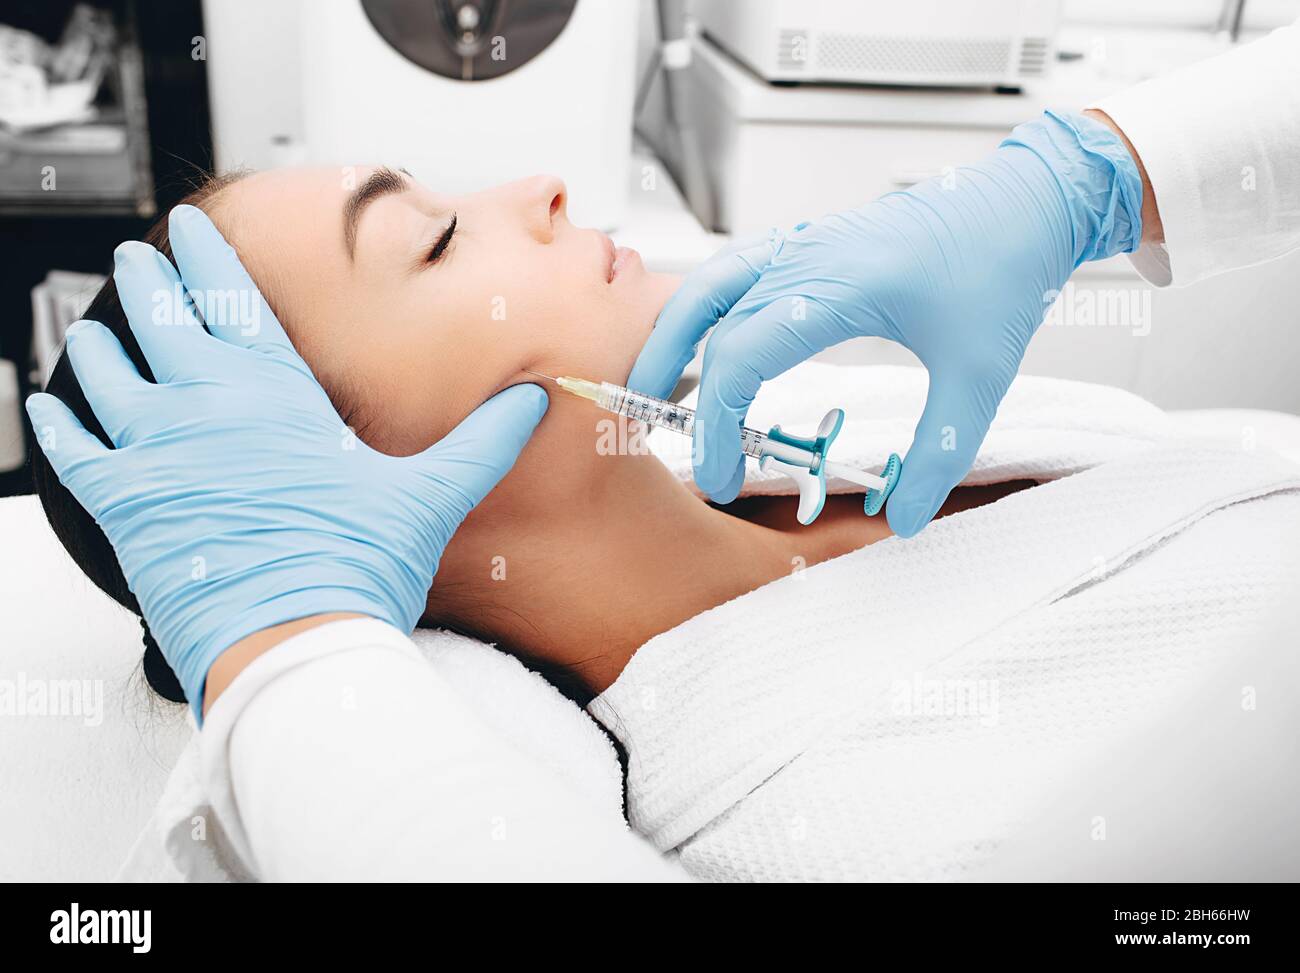 woman having facial injections for facelift and anti-aging effect Stock Photo